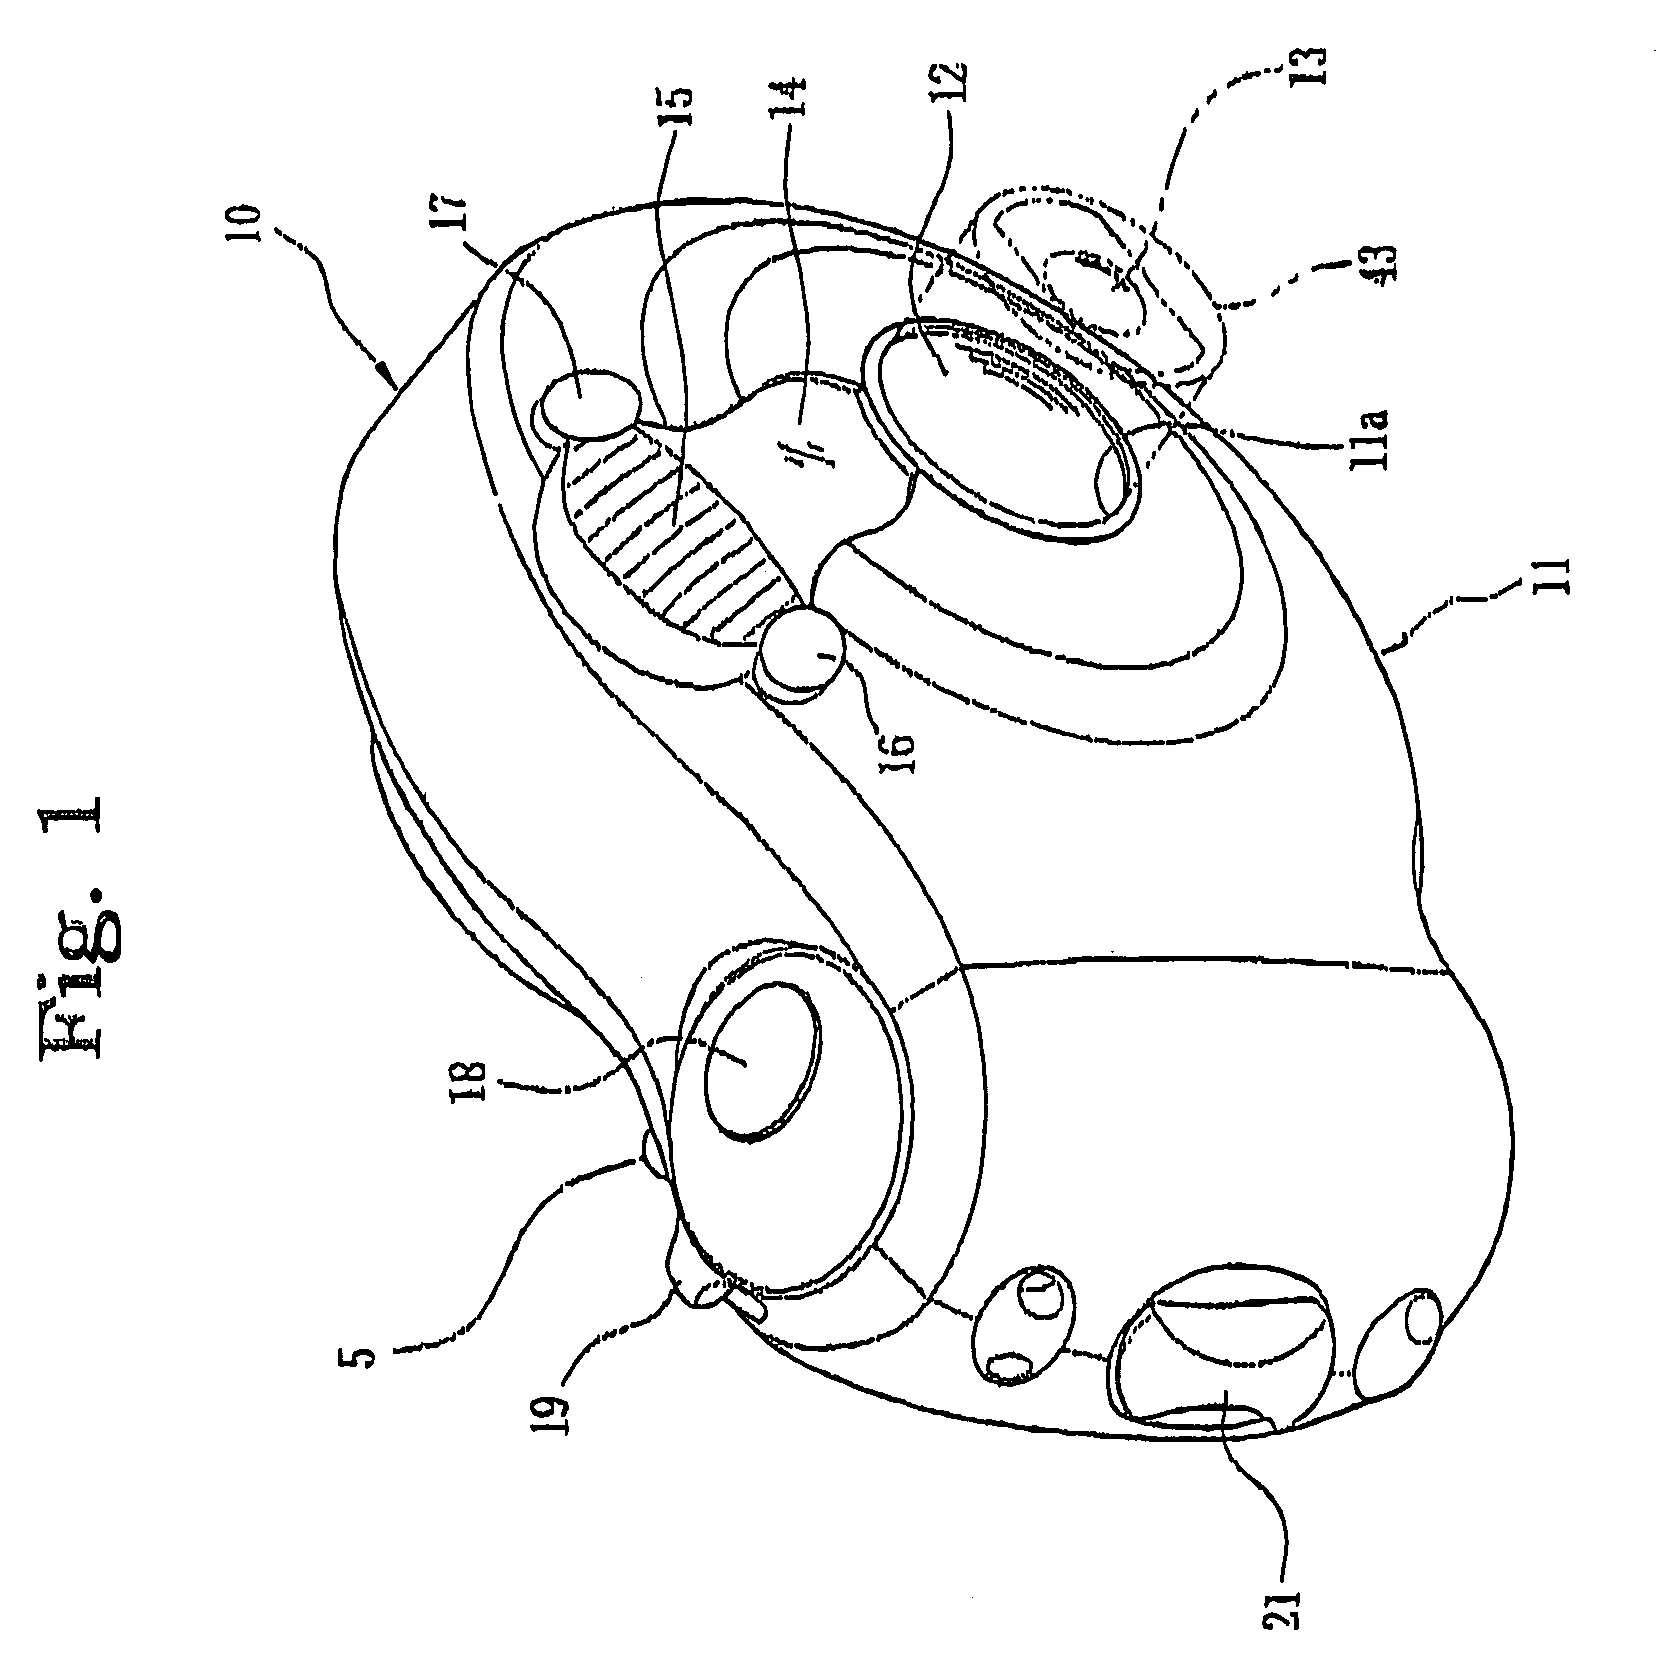 Lens-barrier device for camera